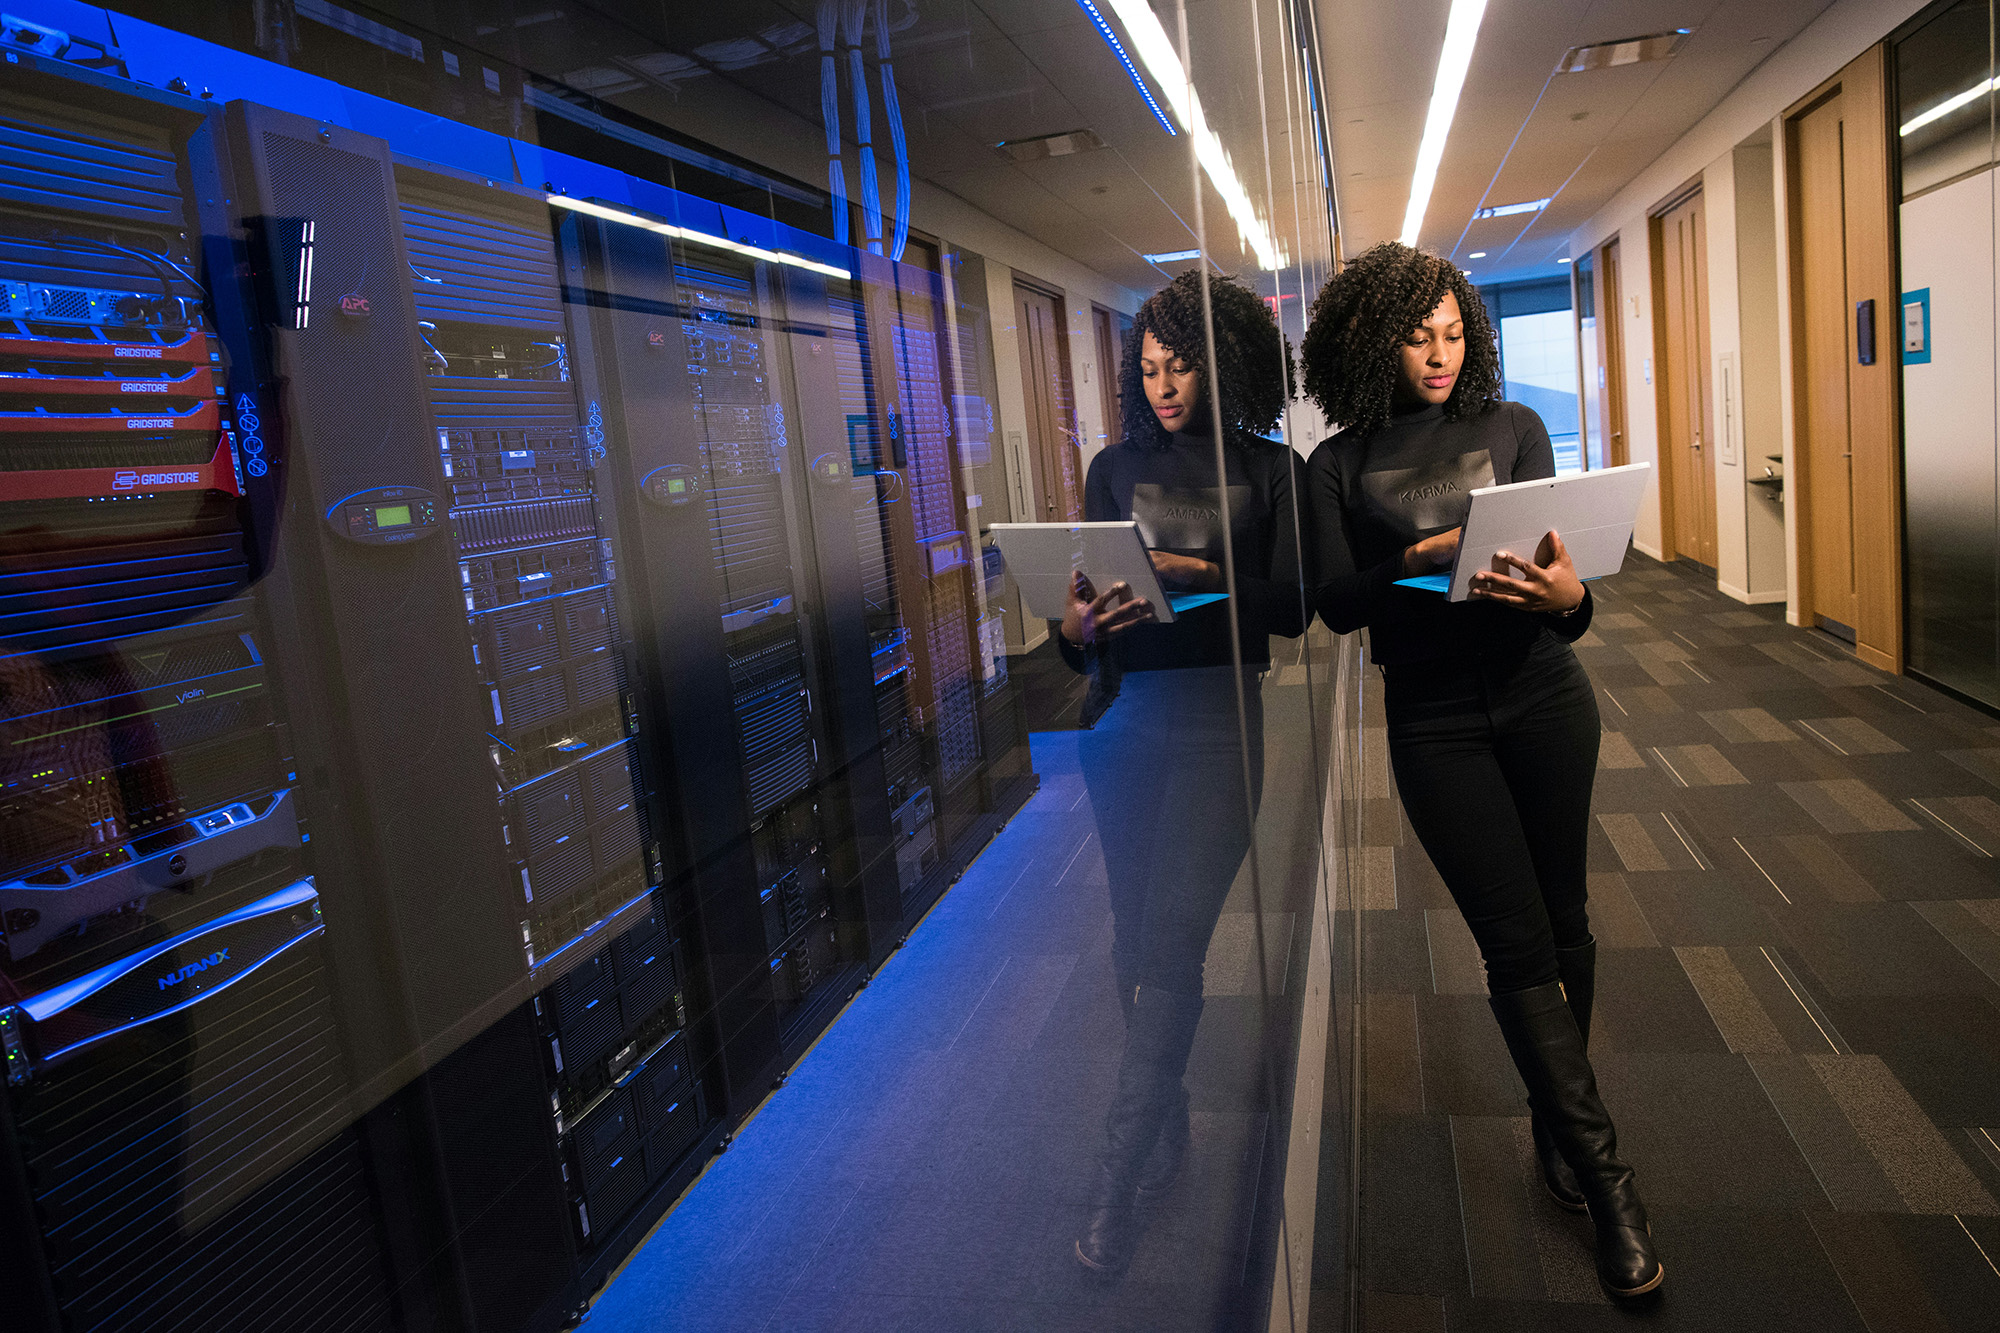 Woman outside of a server room using a Surface laptop